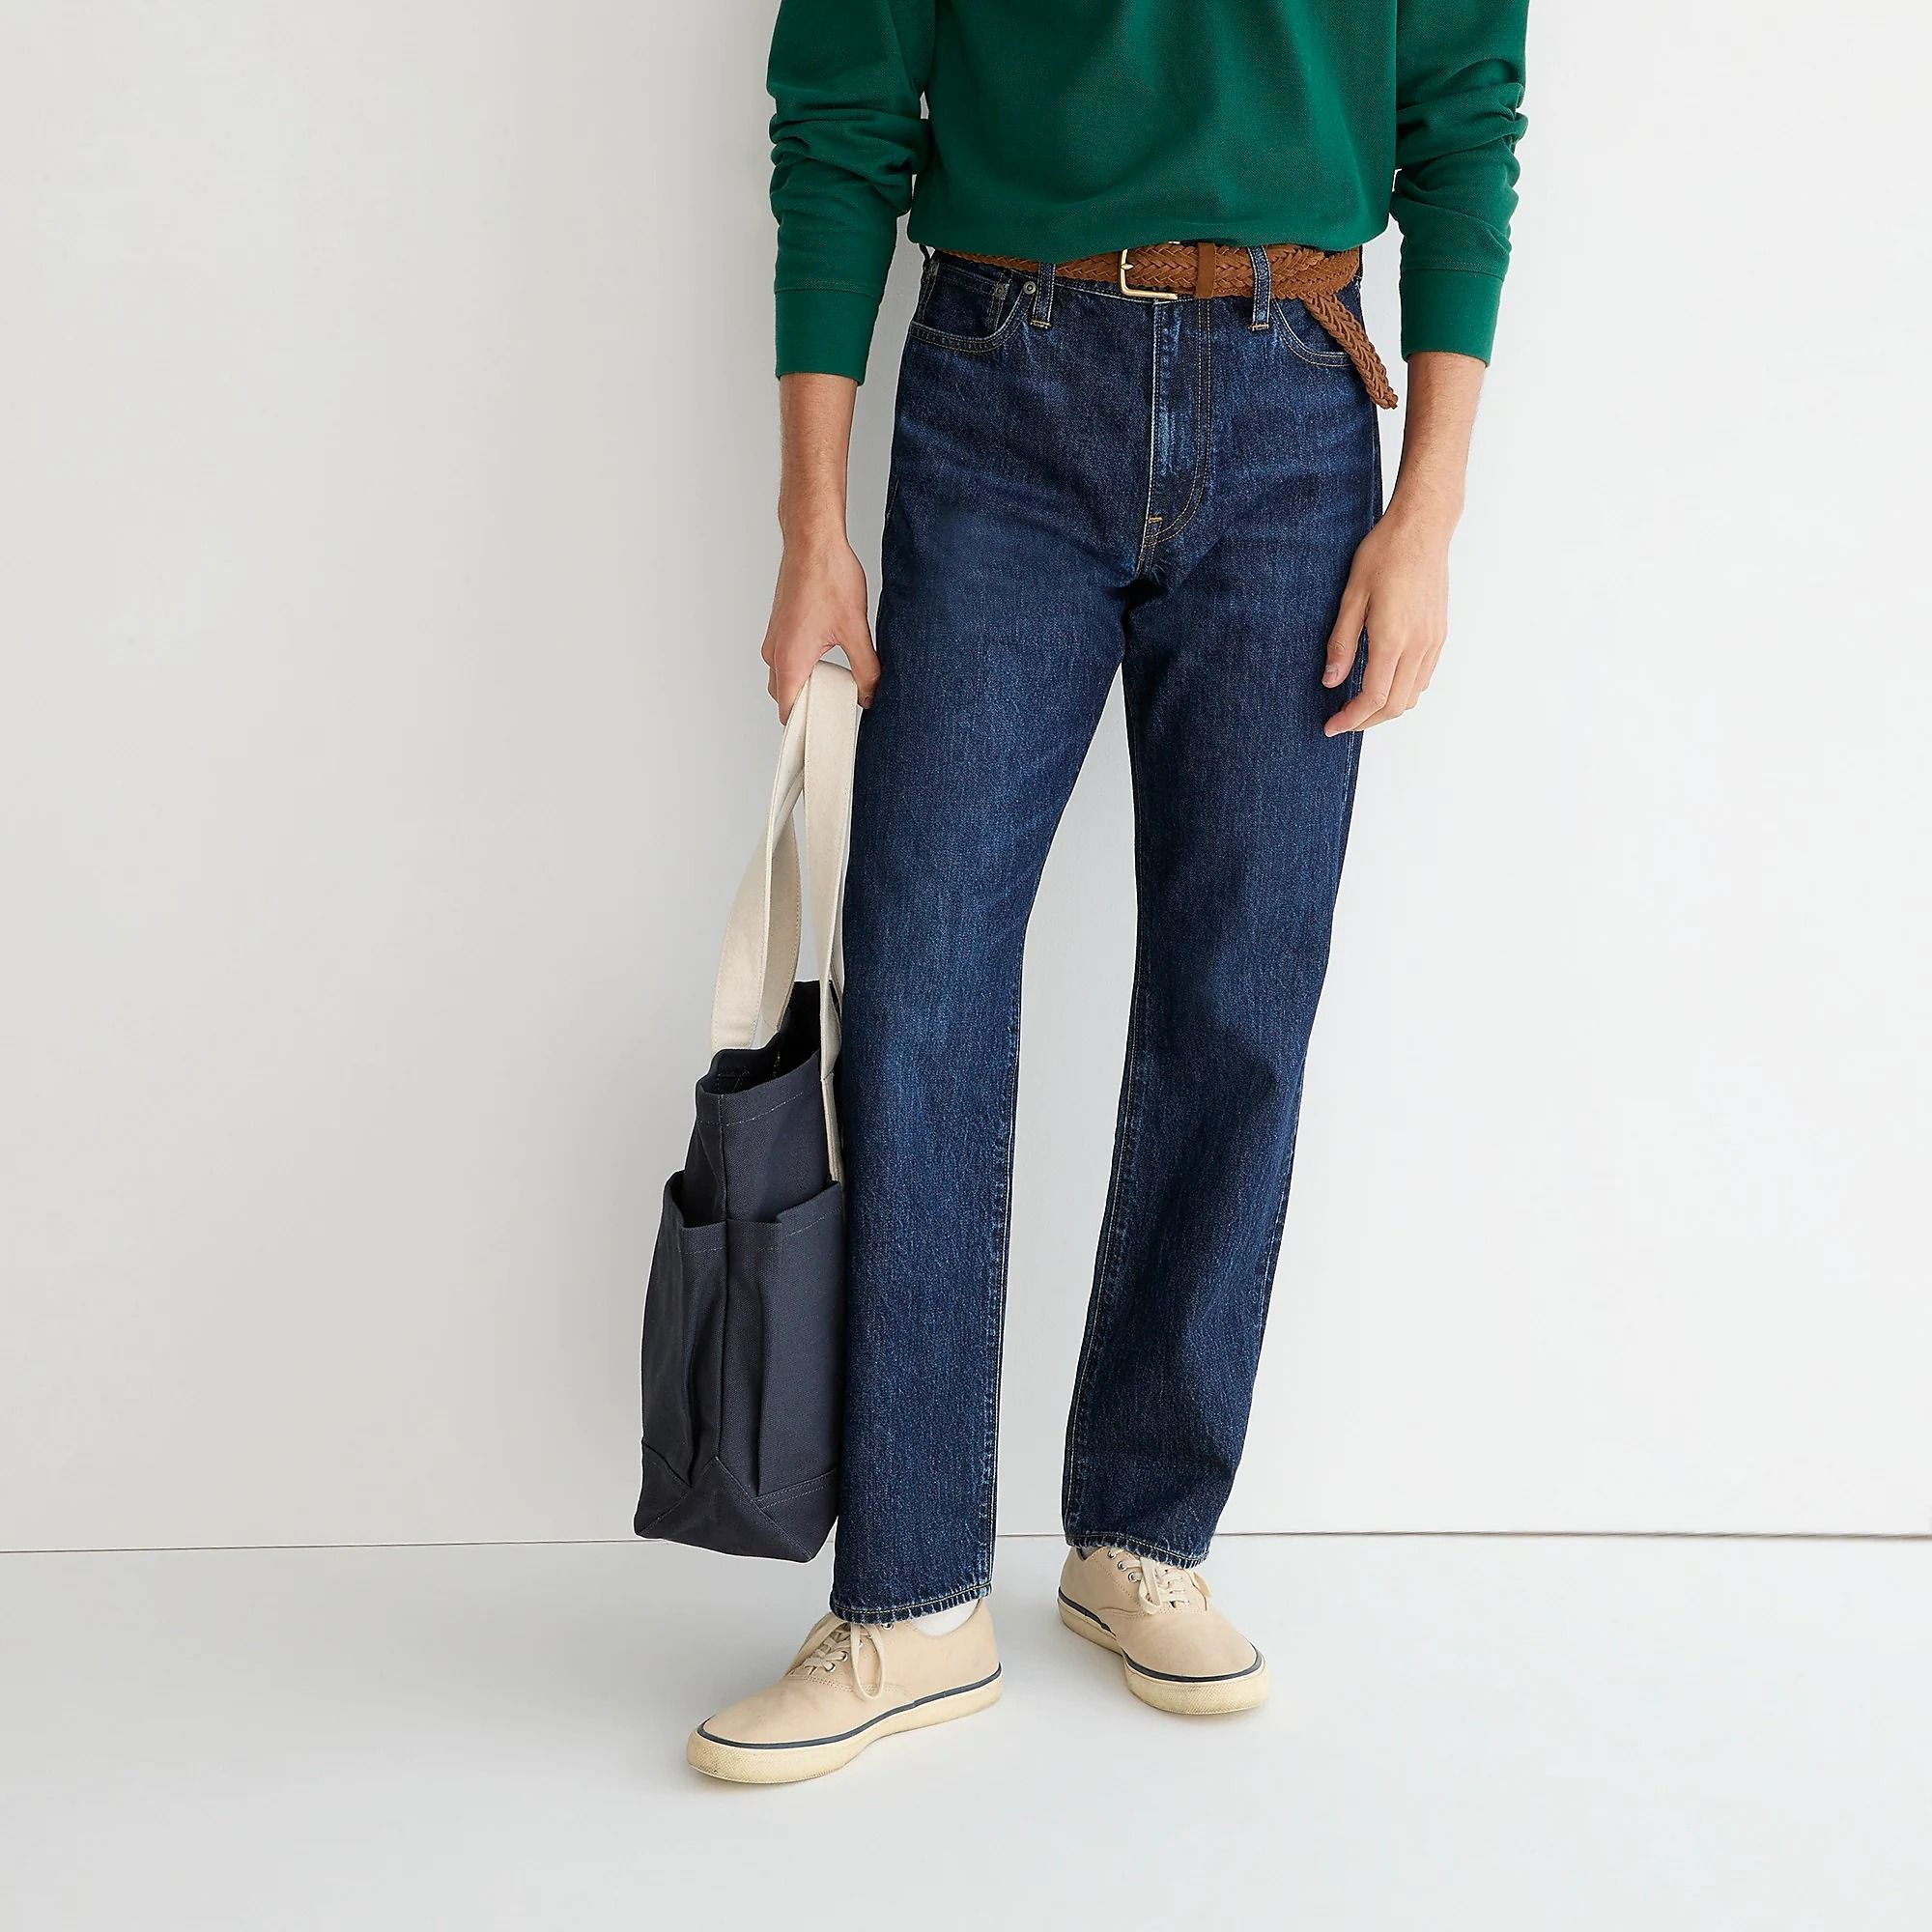 Classic Relaxed-fit Jean in One-year Wash